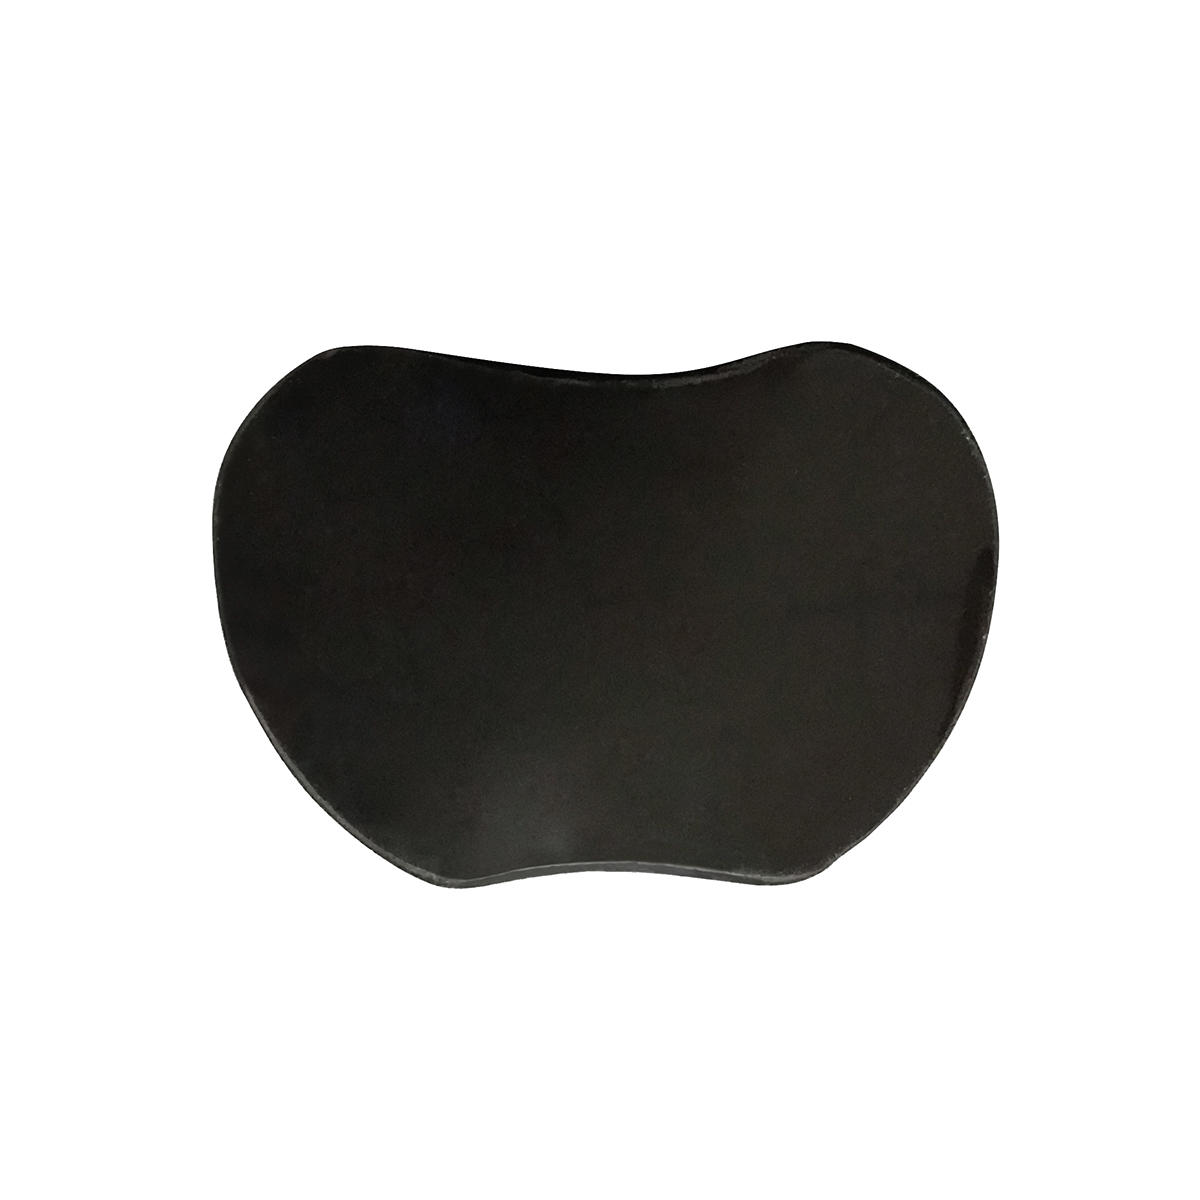 Ergonomic memory foam apple shape wrist rest for office,home and business